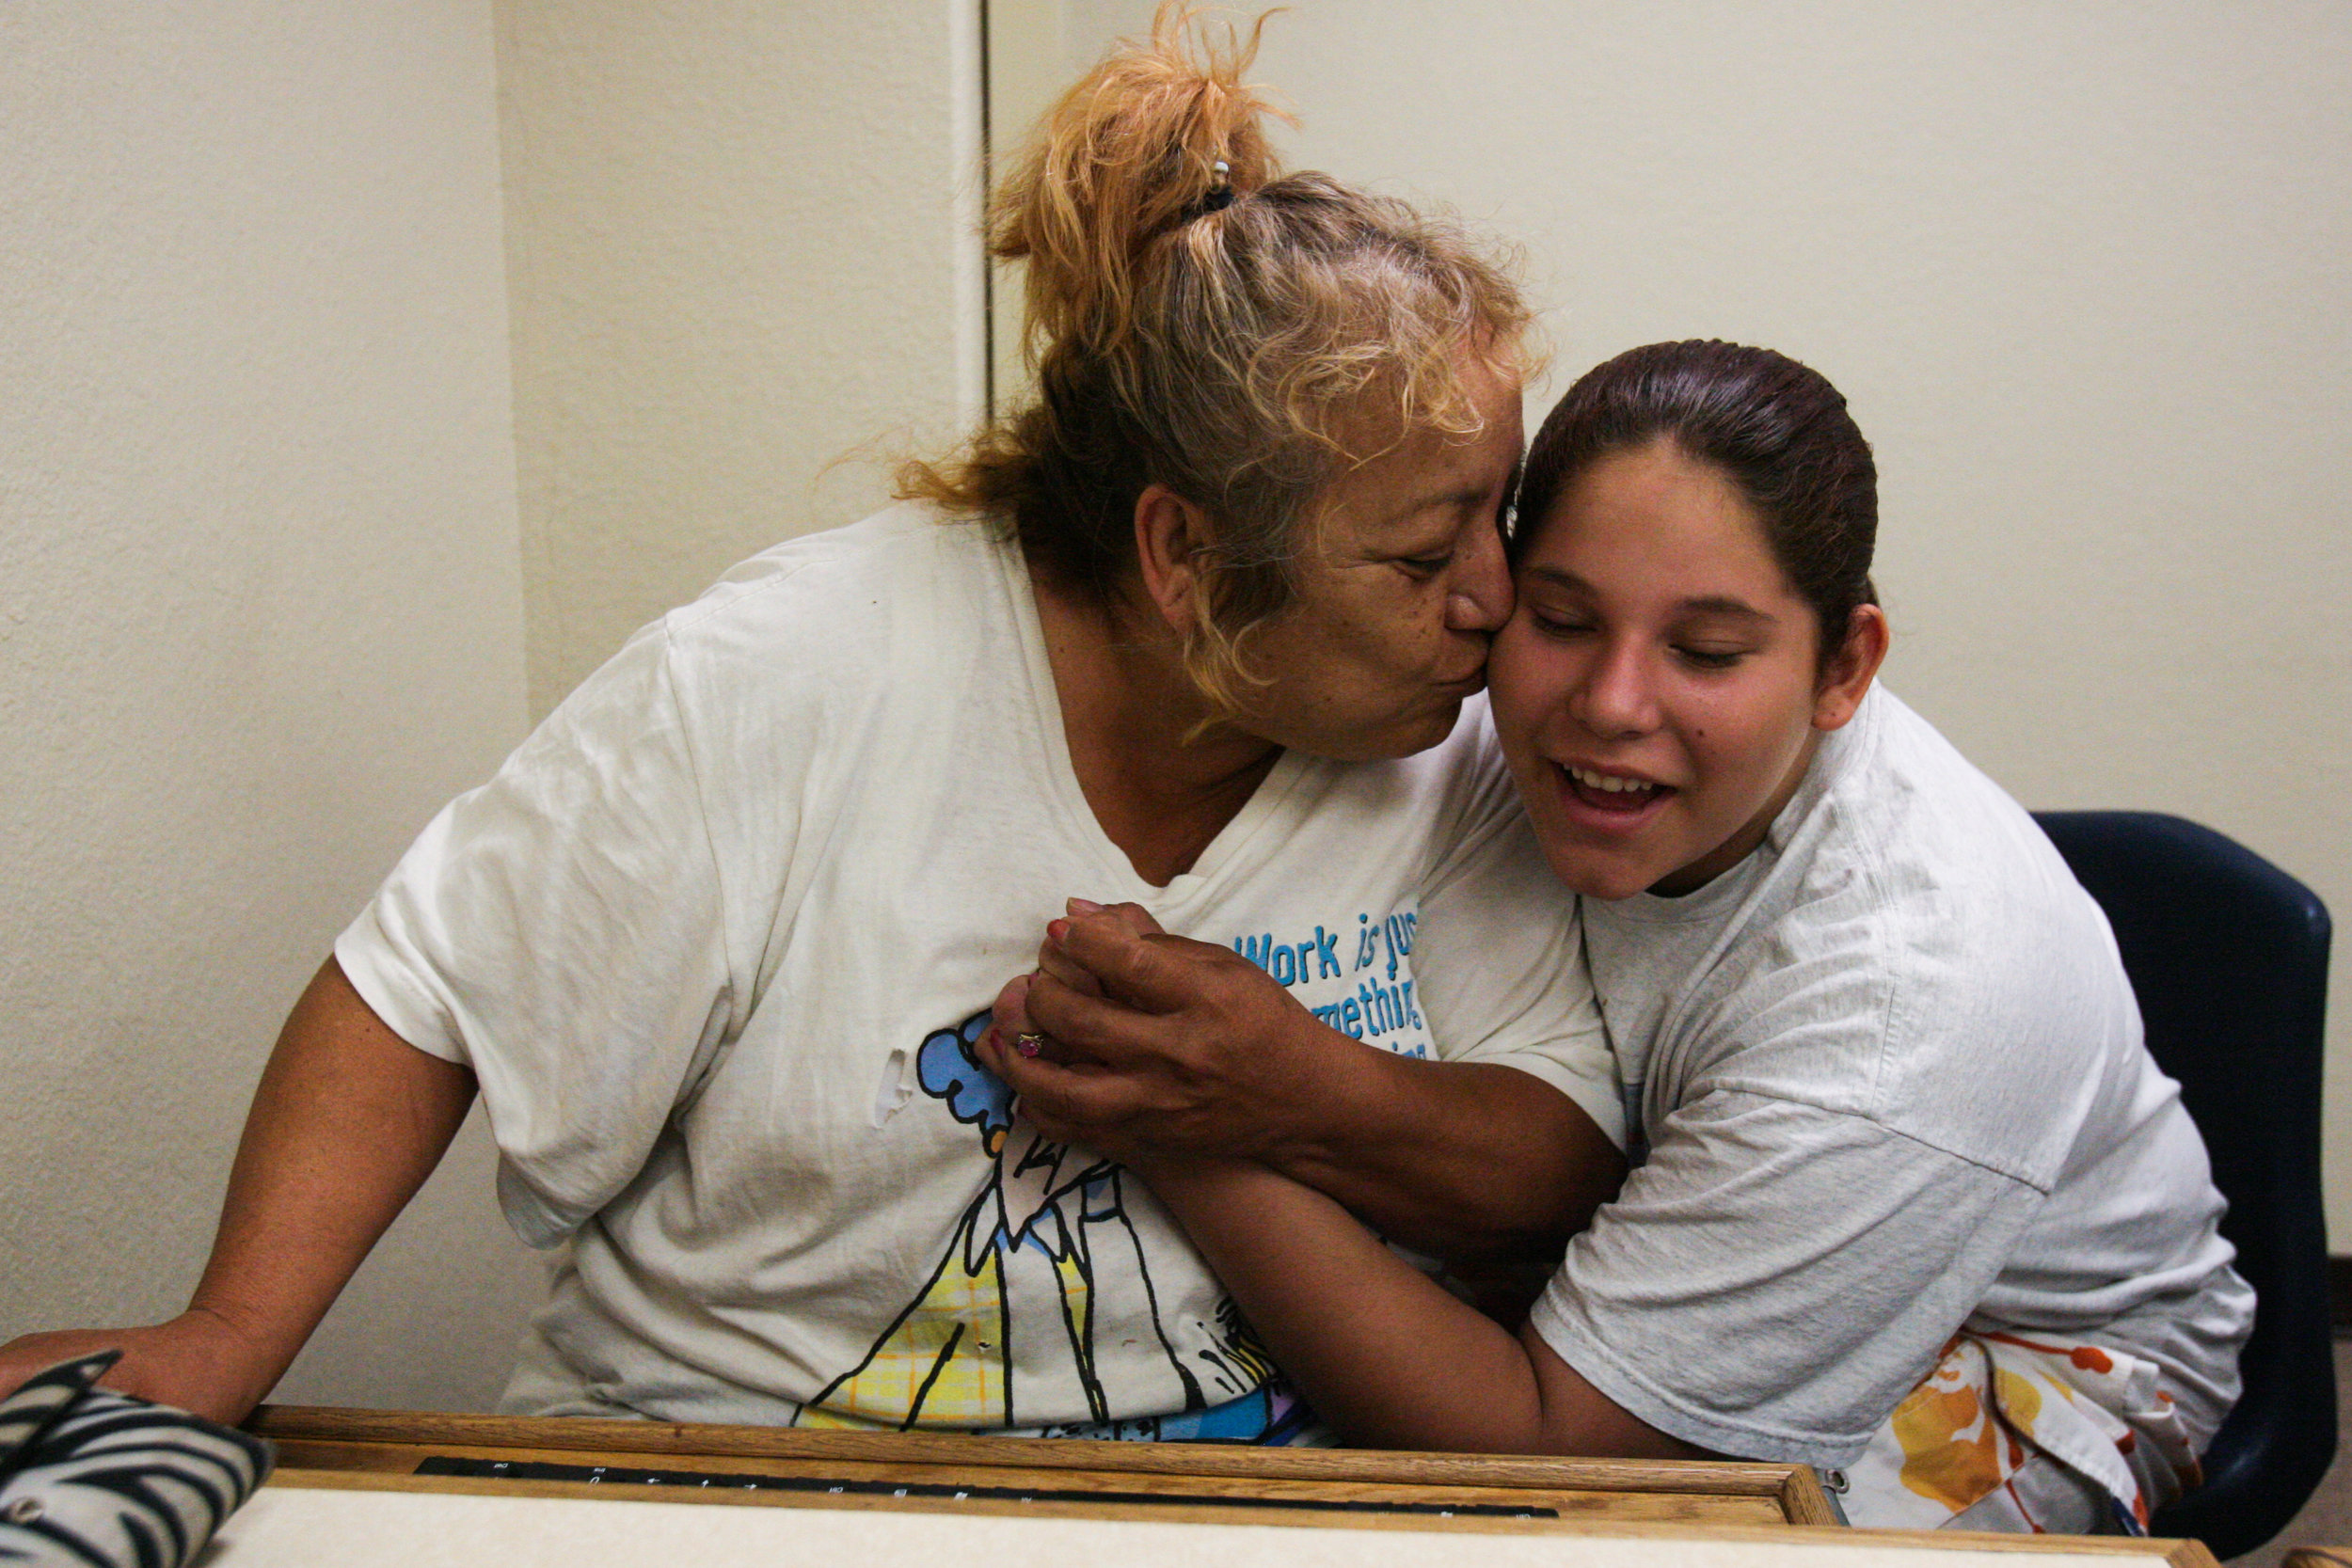  Homeless mother Juanita Torres, left, celebrates with her daughter Angelica Brito, 12, after learning that her request for financial aid is approved so that she can go back to college July 16, 2008, at the Ector County Public Library in Odessa, Texa